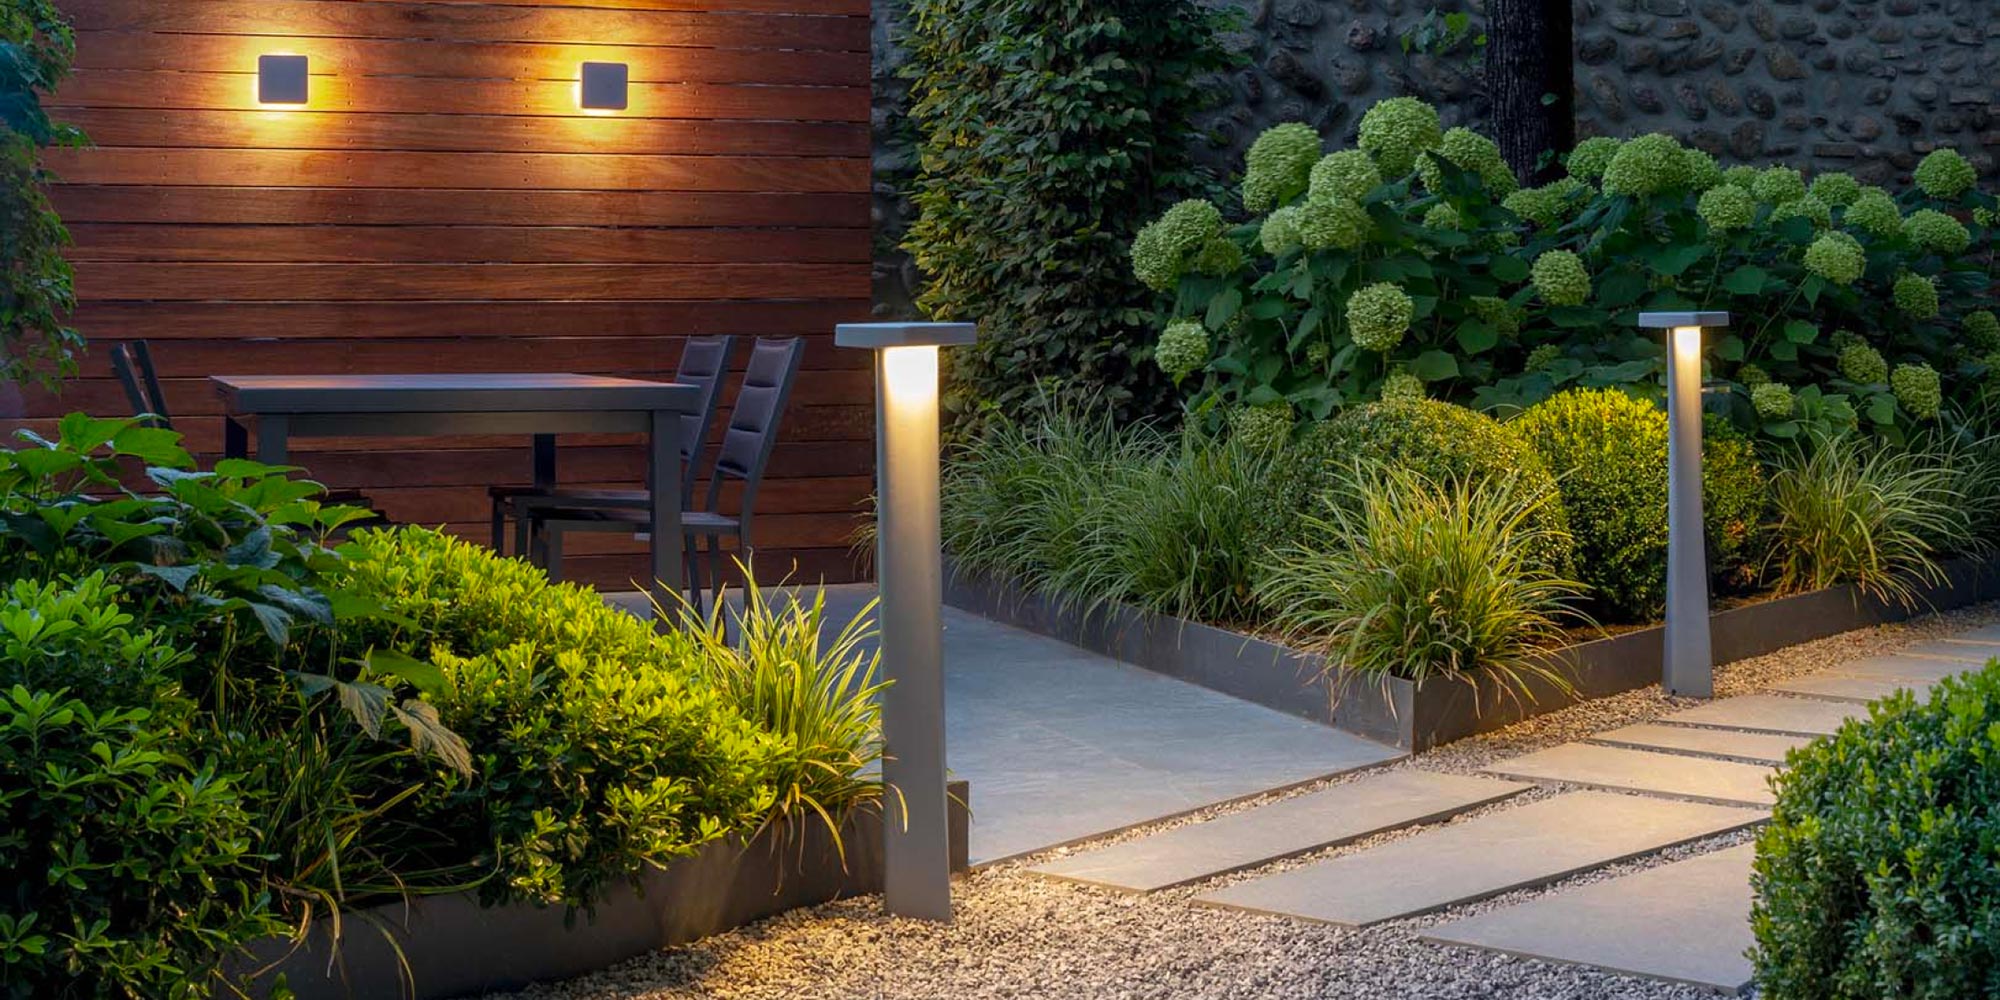 Lighting bollards are versatile and efficient lighting solutions in various outdoor settings, from public parks to private residences. While they are designed the blend with surrounding hardscape and landscape design, the primary function is to improve visibility and safety with energy-efficient LED lighting. Here are a few of our favorites that can complement most outdoor spaces.